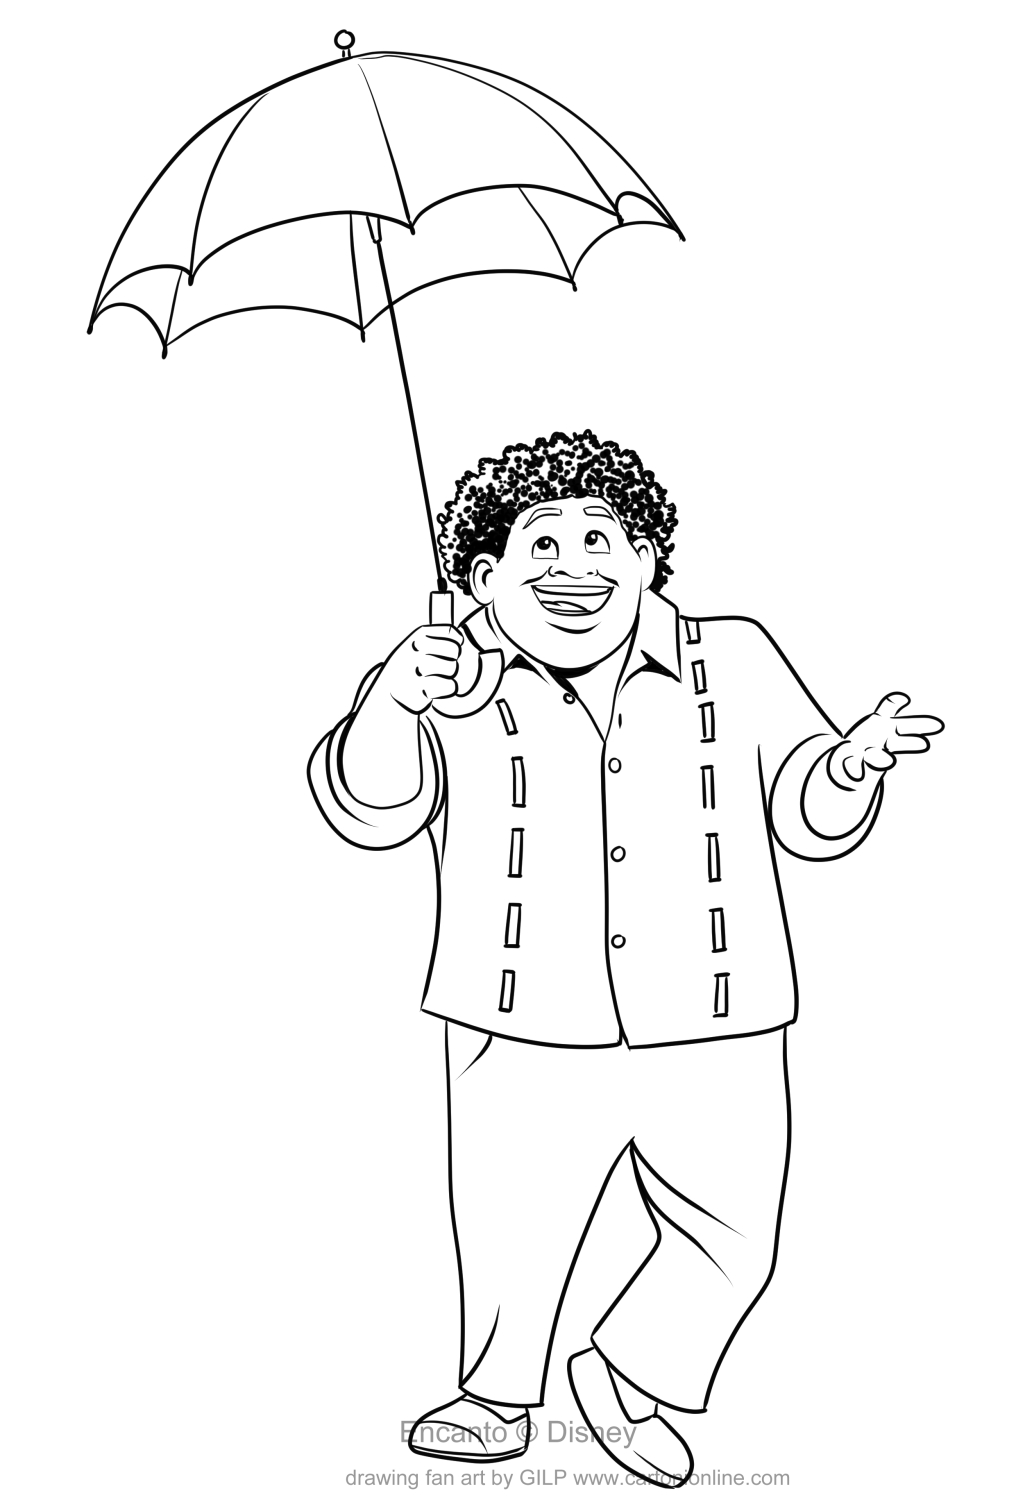 Felix Madrigal Encanto coloring page to print and coloring